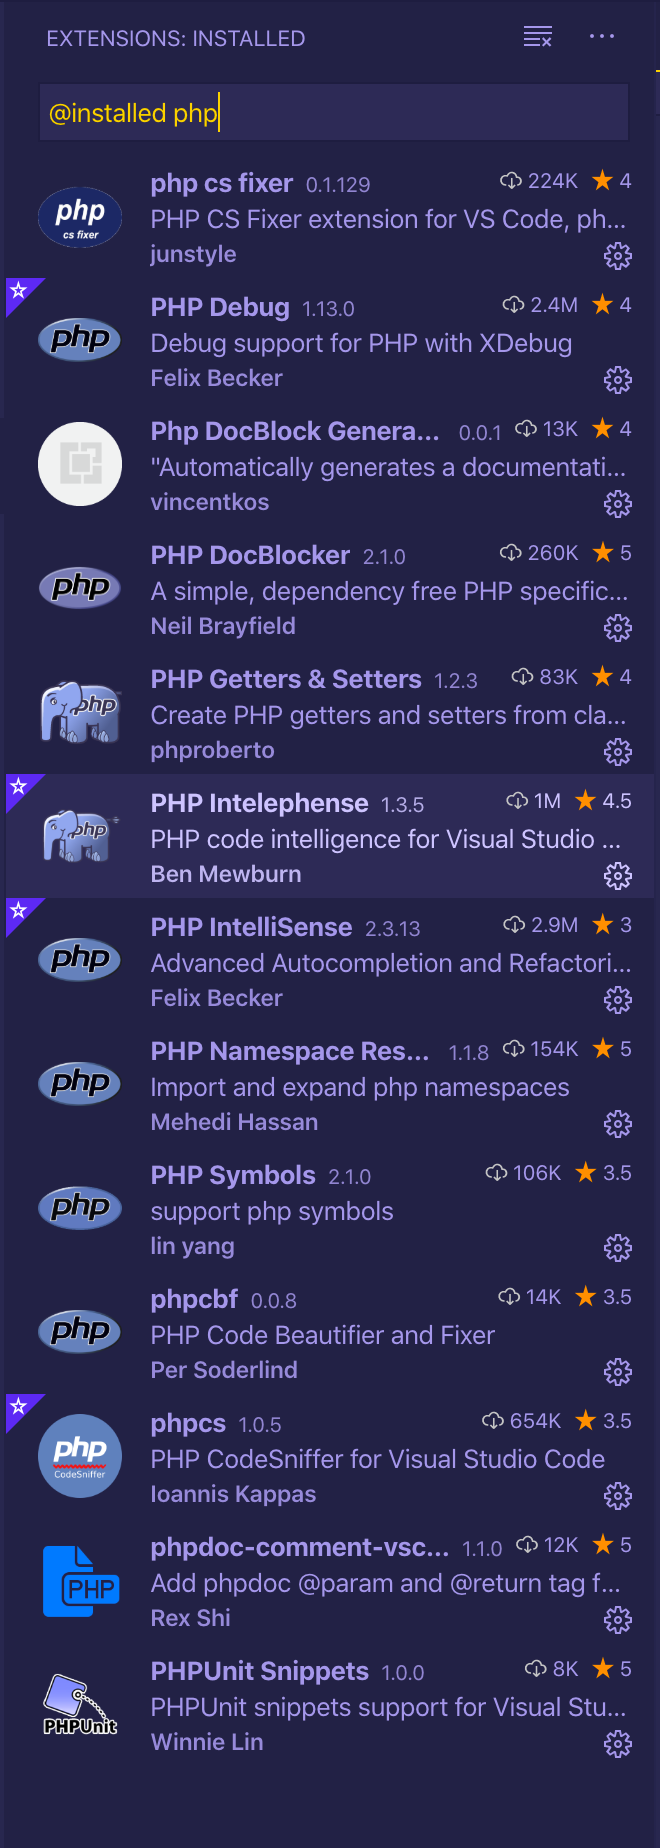 Image of extensions installed for PHP Project